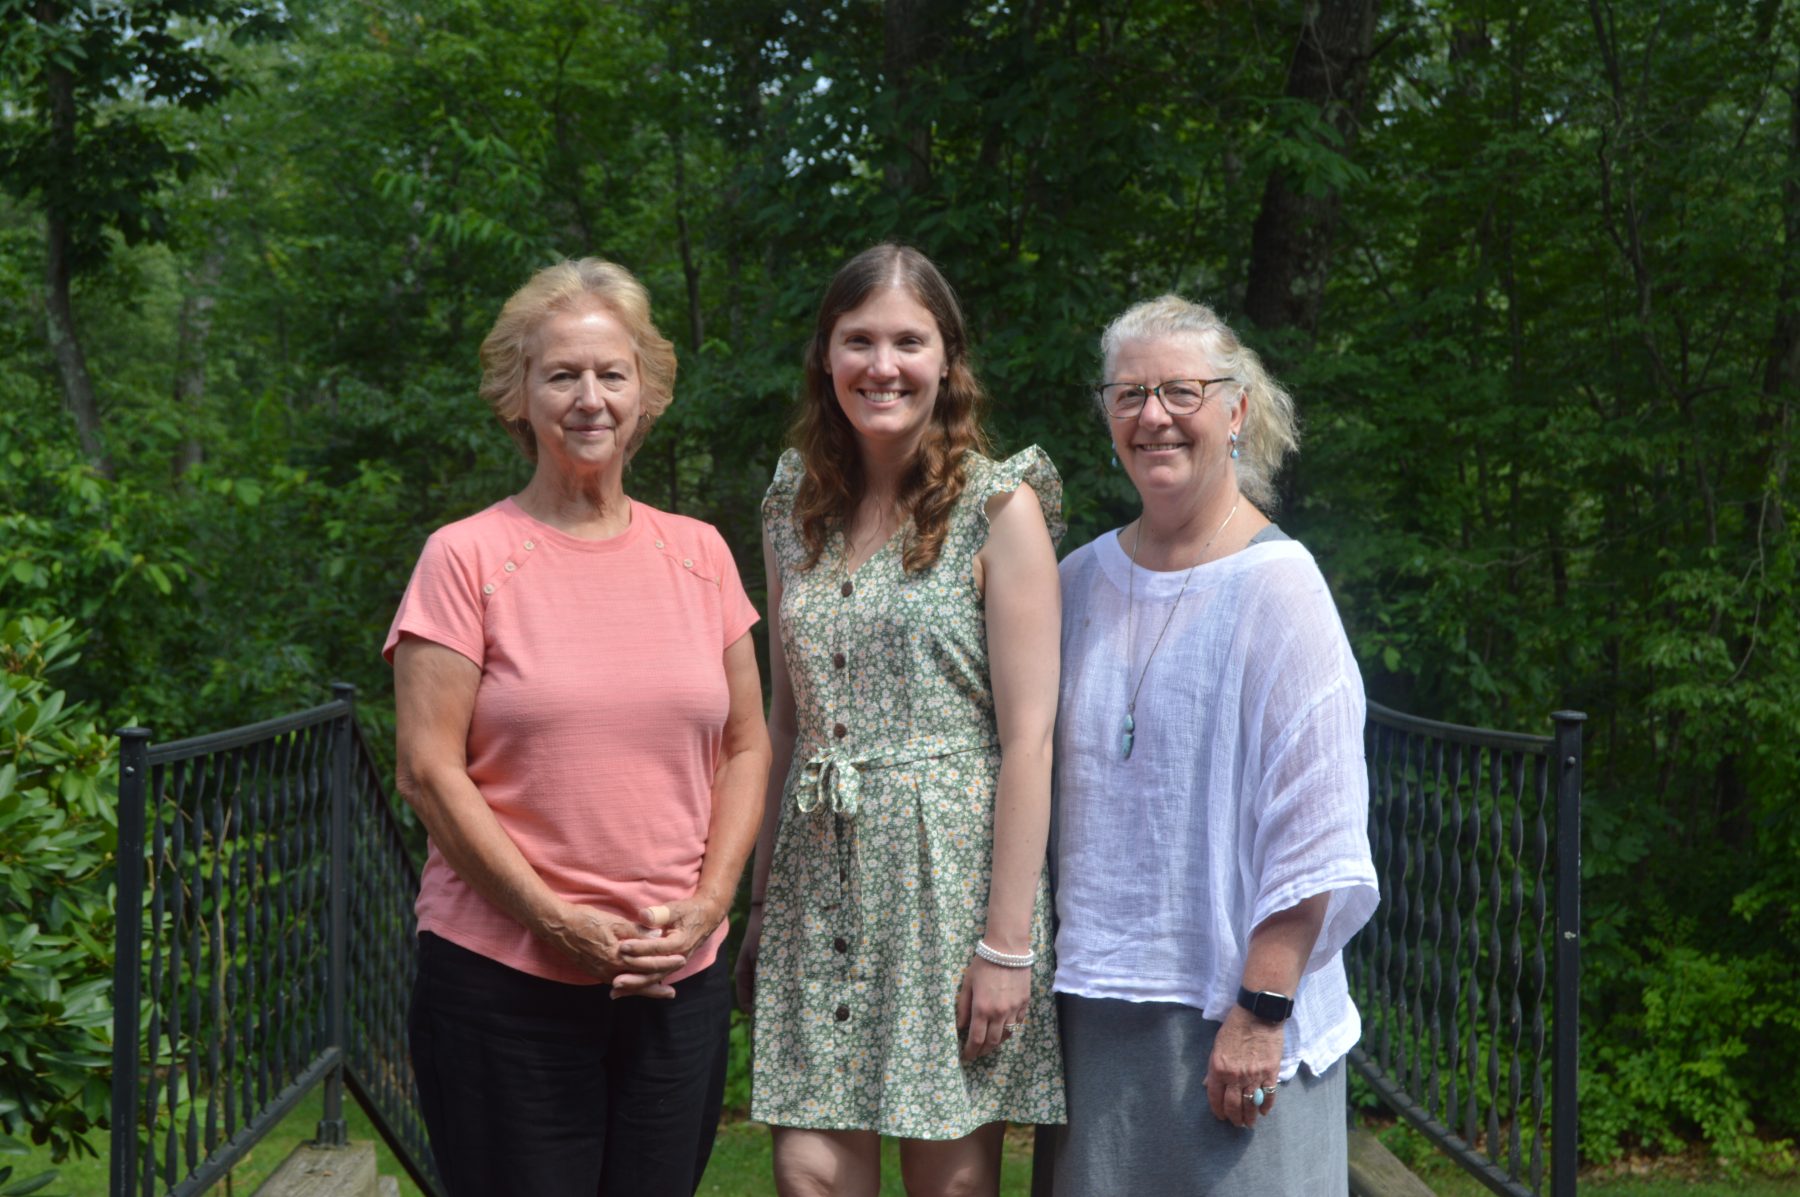 (Left to right) Kathleen Augustine, Melissa Hatch, and Susan Arnold standing outside.